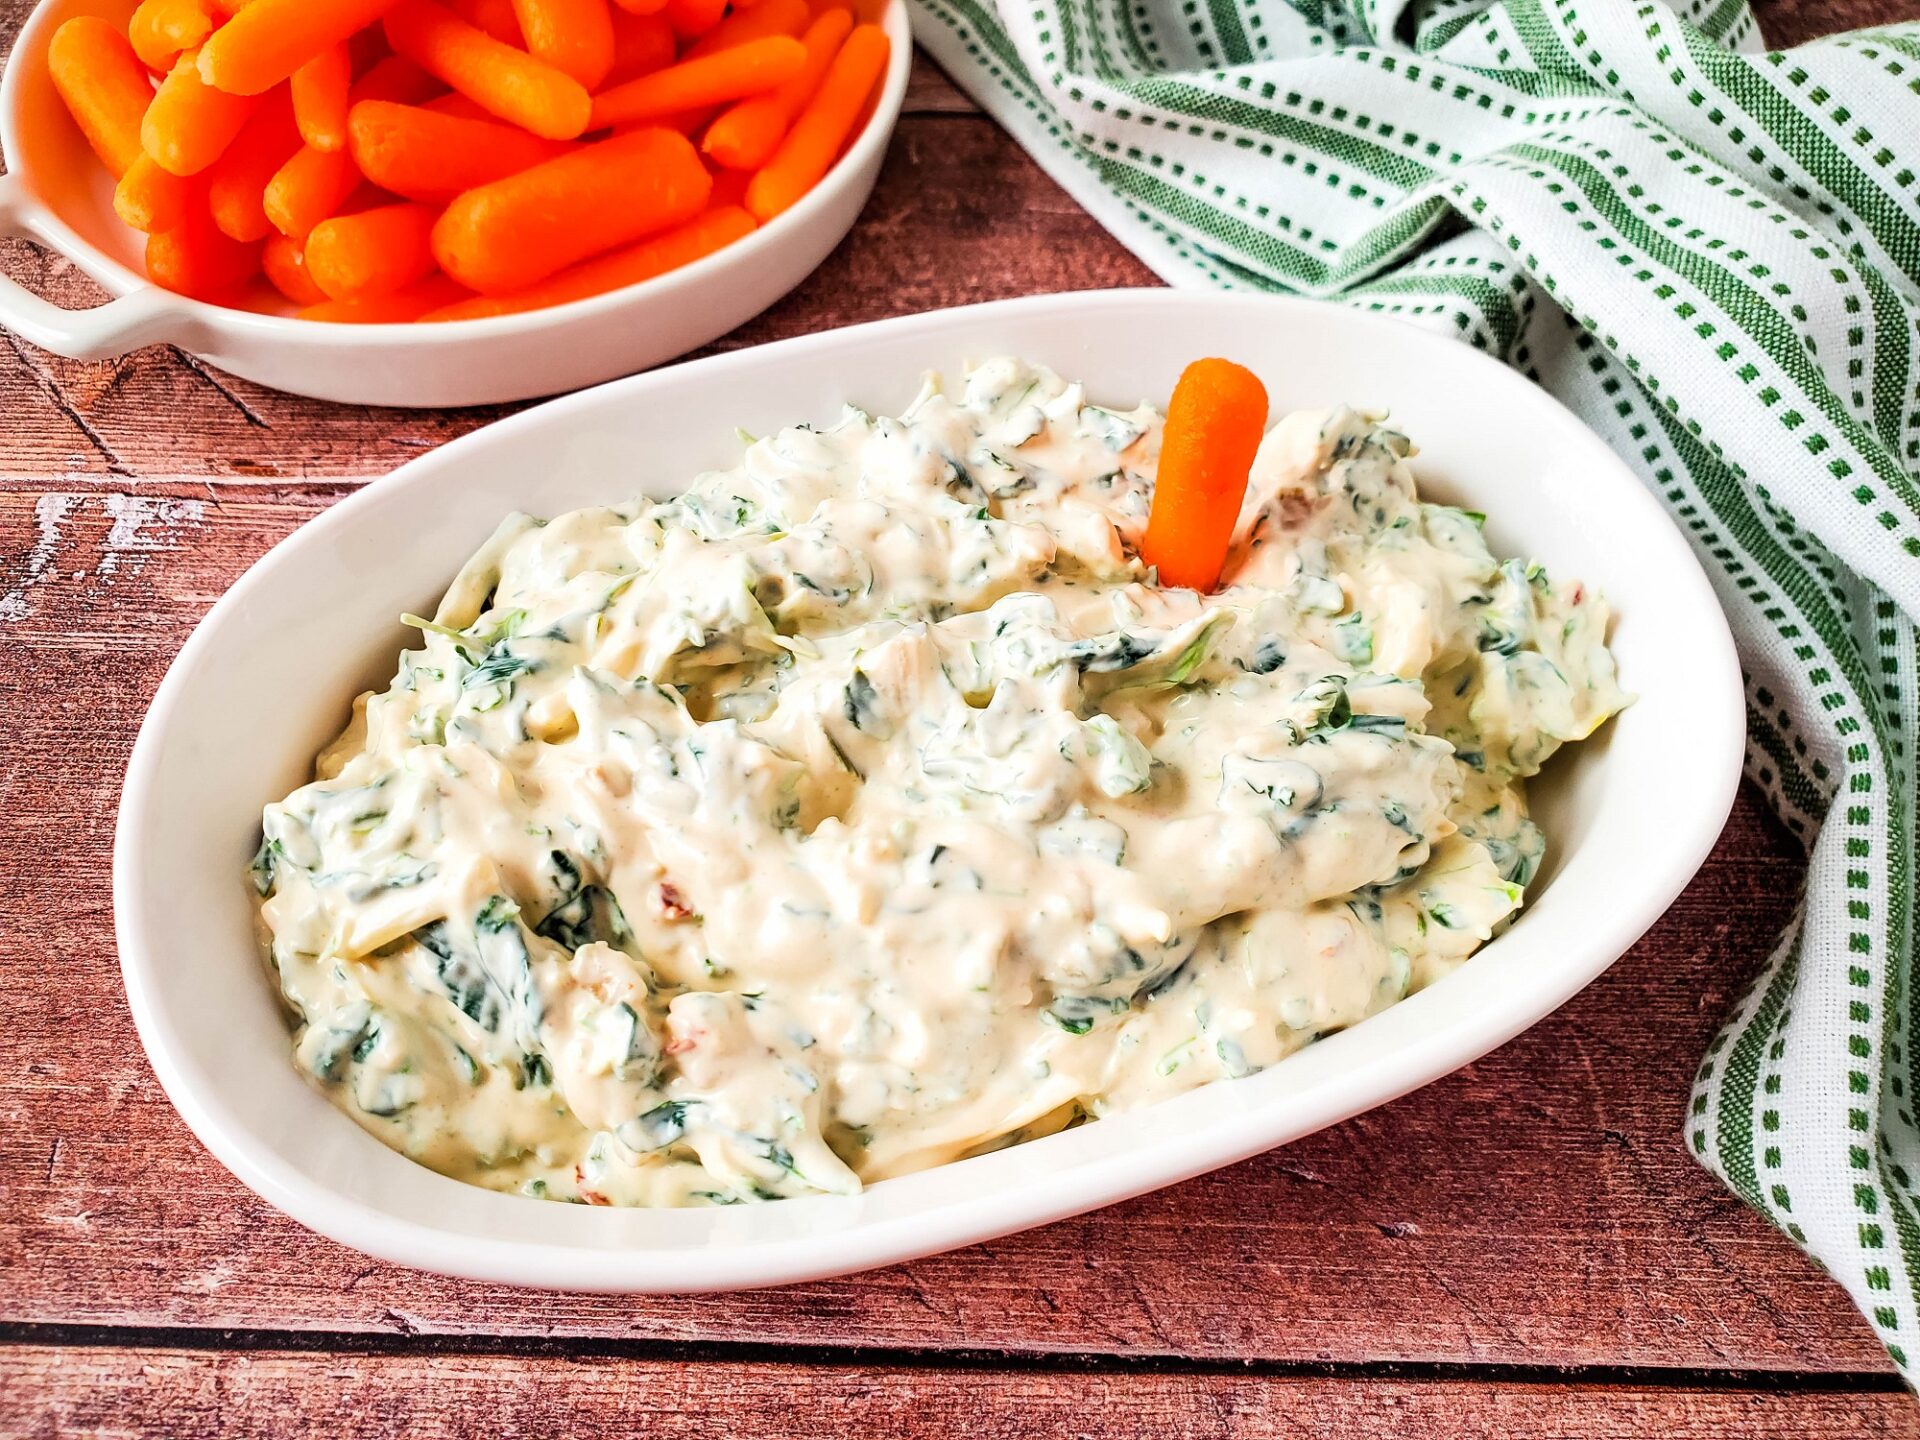 Knorr spinach dip recipe in a baking dish with a baby carrot sticking out of it.